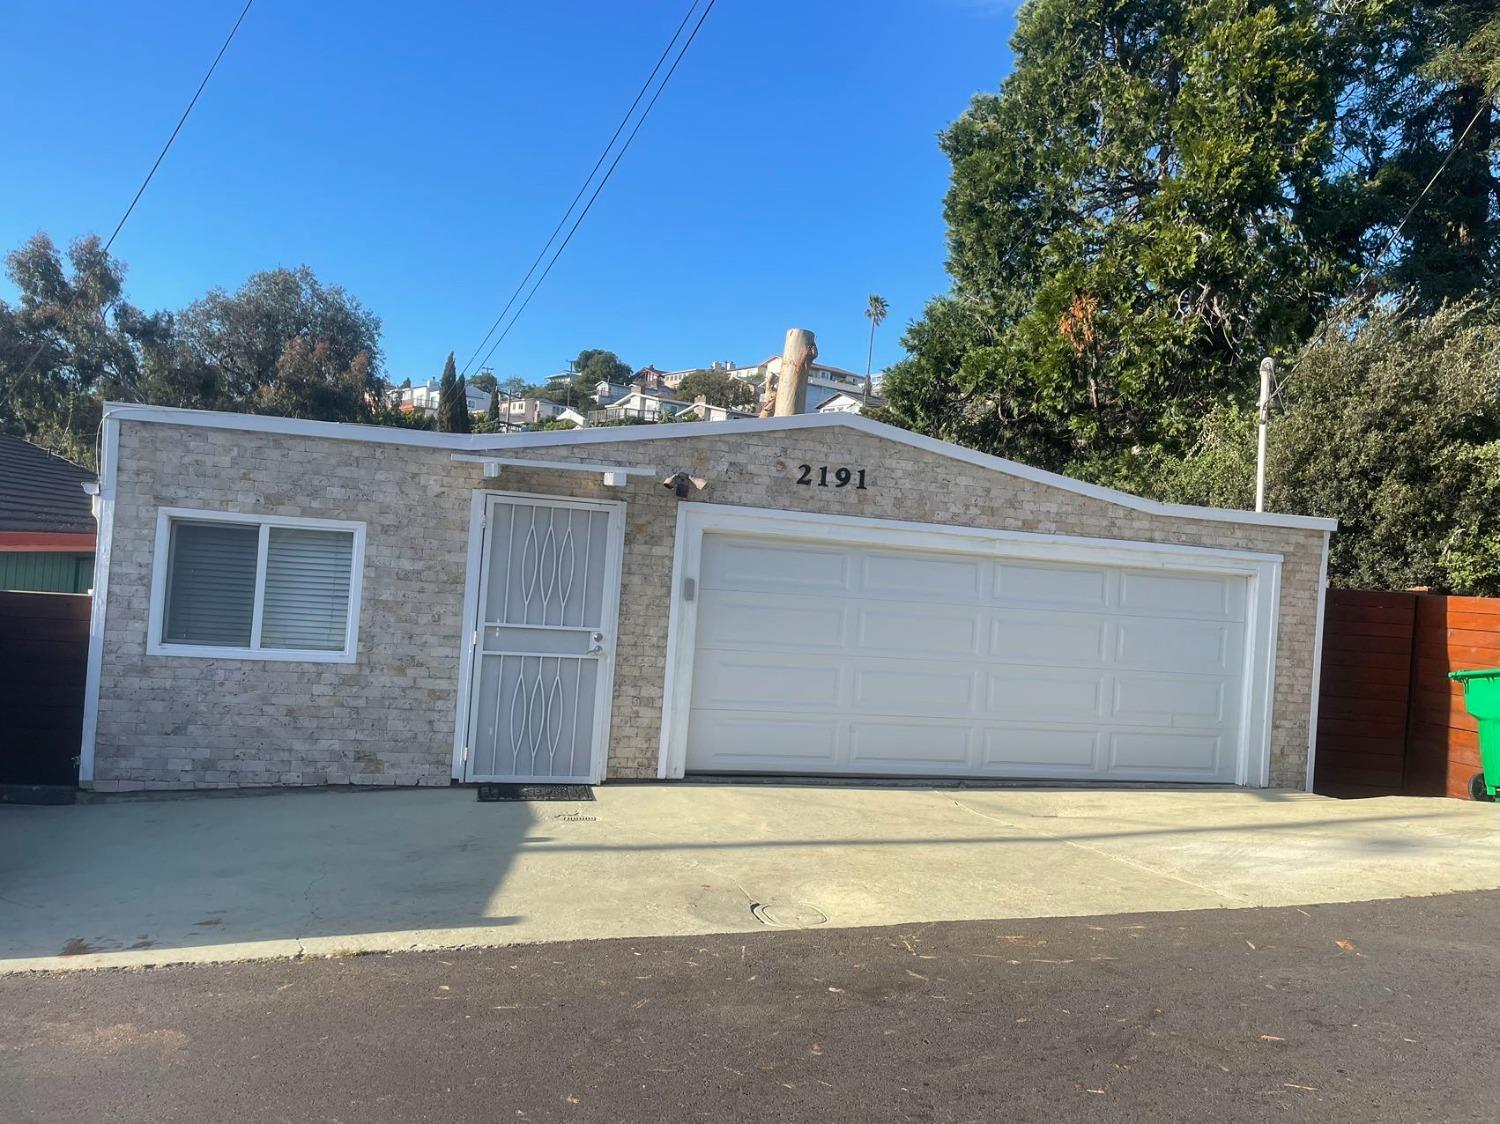 Photo of 2191 167th Ave in San Leandro, CA